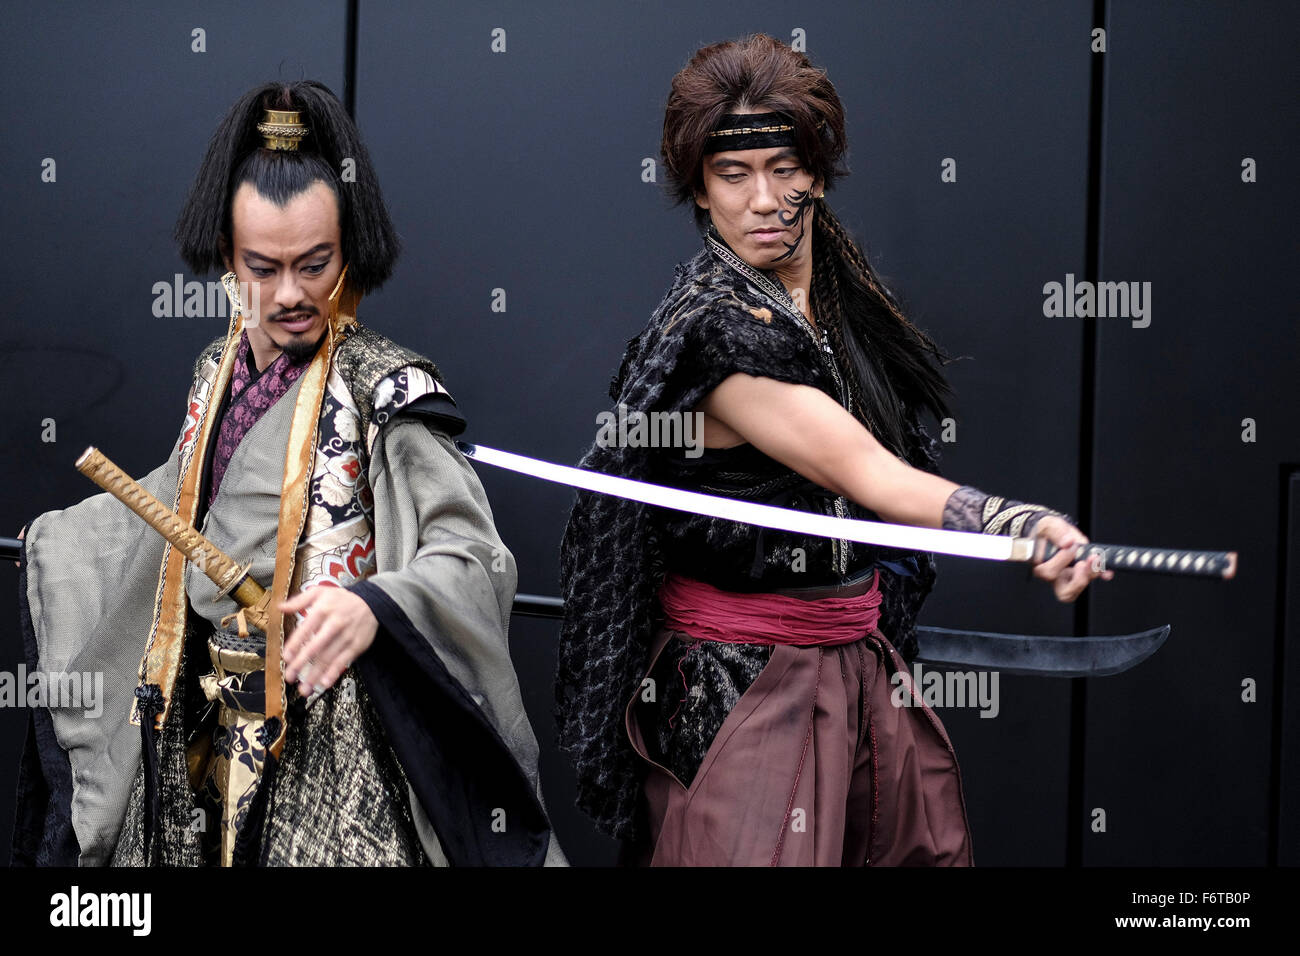 Photocall: The Japanese theatre company 30-DELUX present a samurai swordplay scene from their show KULI-KALA: REVENGE OF THE SAMURAI on 19/11/2015 at Crossrail Roof Gardens, Canary Wharf, London. Revenge of the Samurai is an action-packed tale of murder, revenge and magic featuring samurai swordplay, live music and song and a story of murder and revenge that opens at Stratford Circus on November 24th and runs till November 28th.. Picture by Julie Edwards Stock Photo